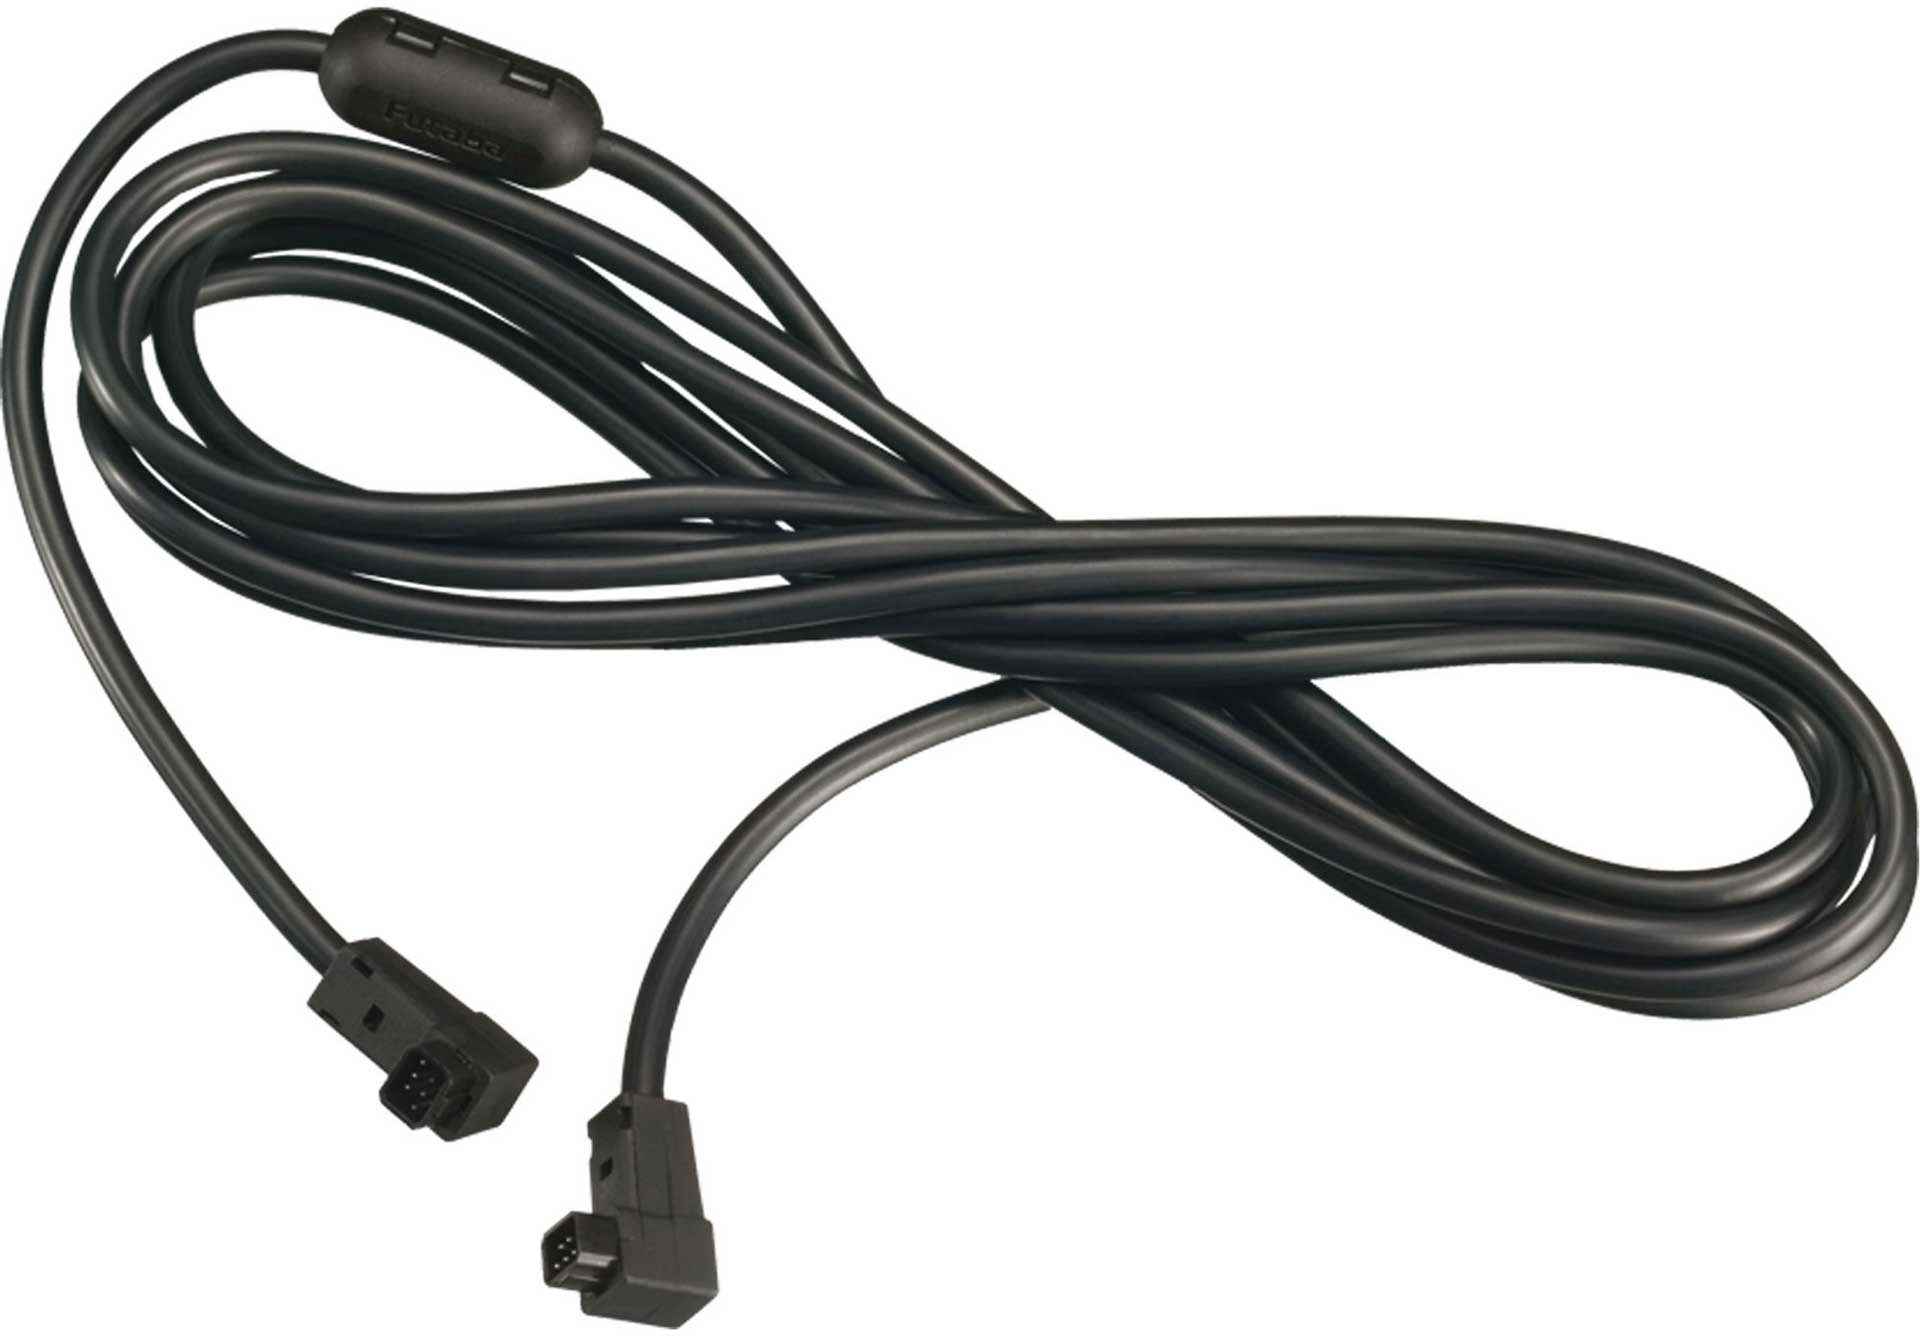 FUTABA TRAINER CABLE with converter (teacher-student cable)